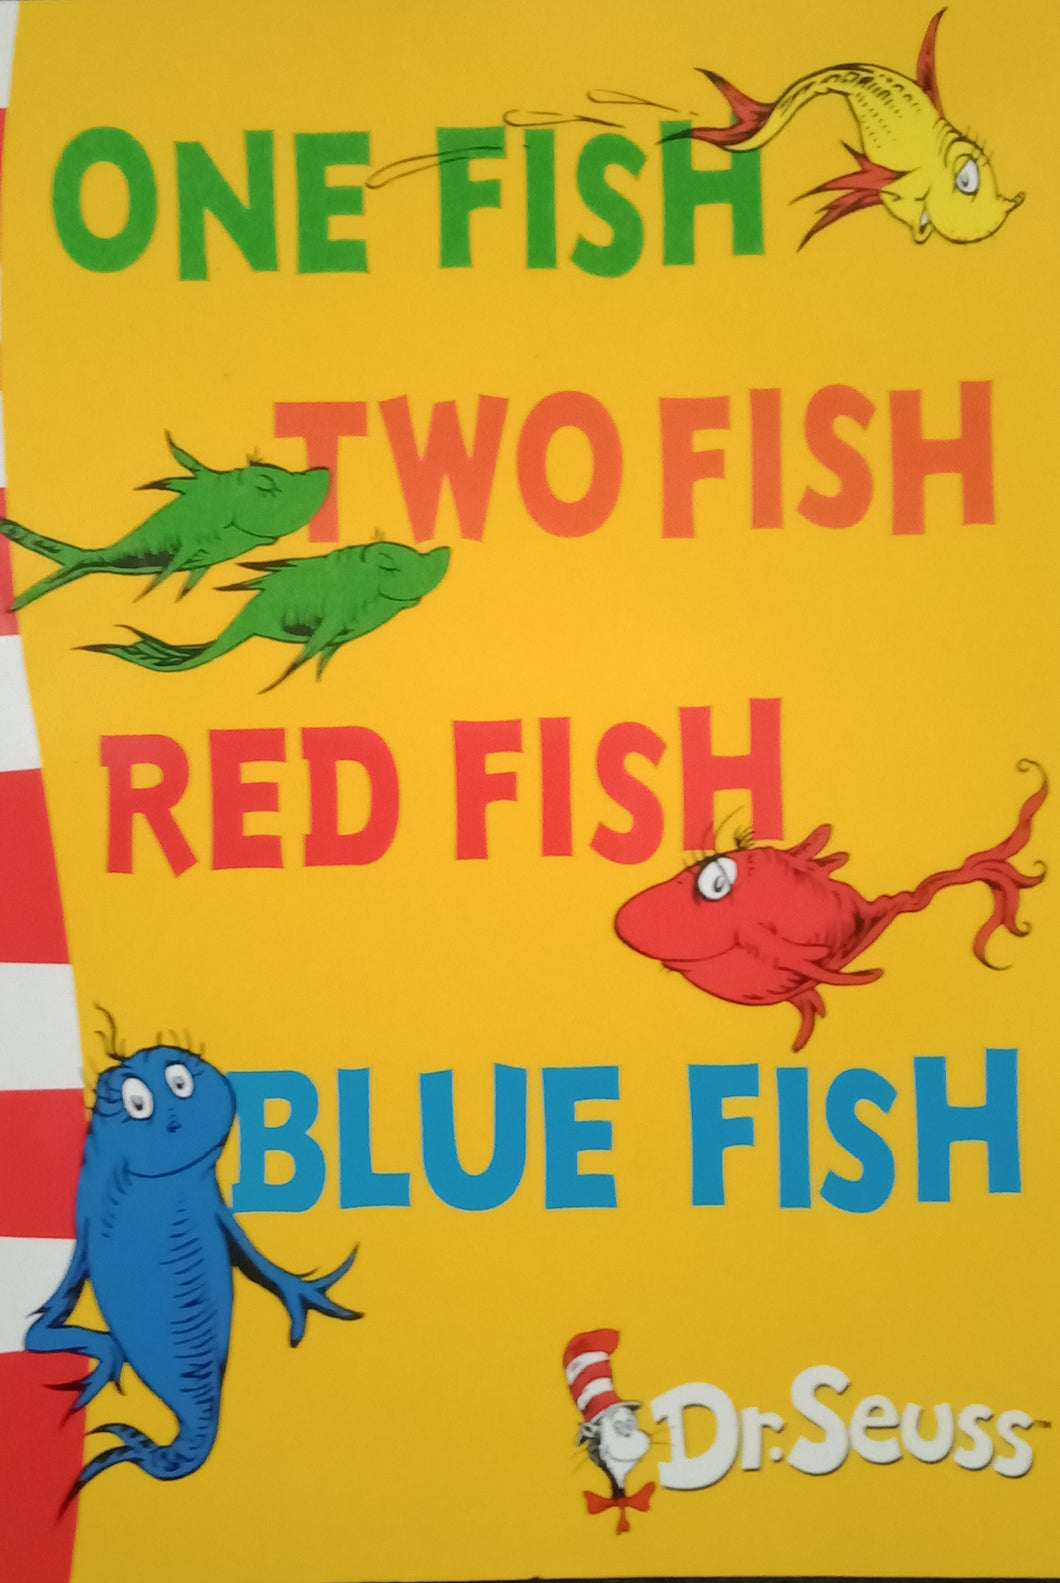 One Fish Two Fish Red Fish Blue Fish by Dr. Suess WS